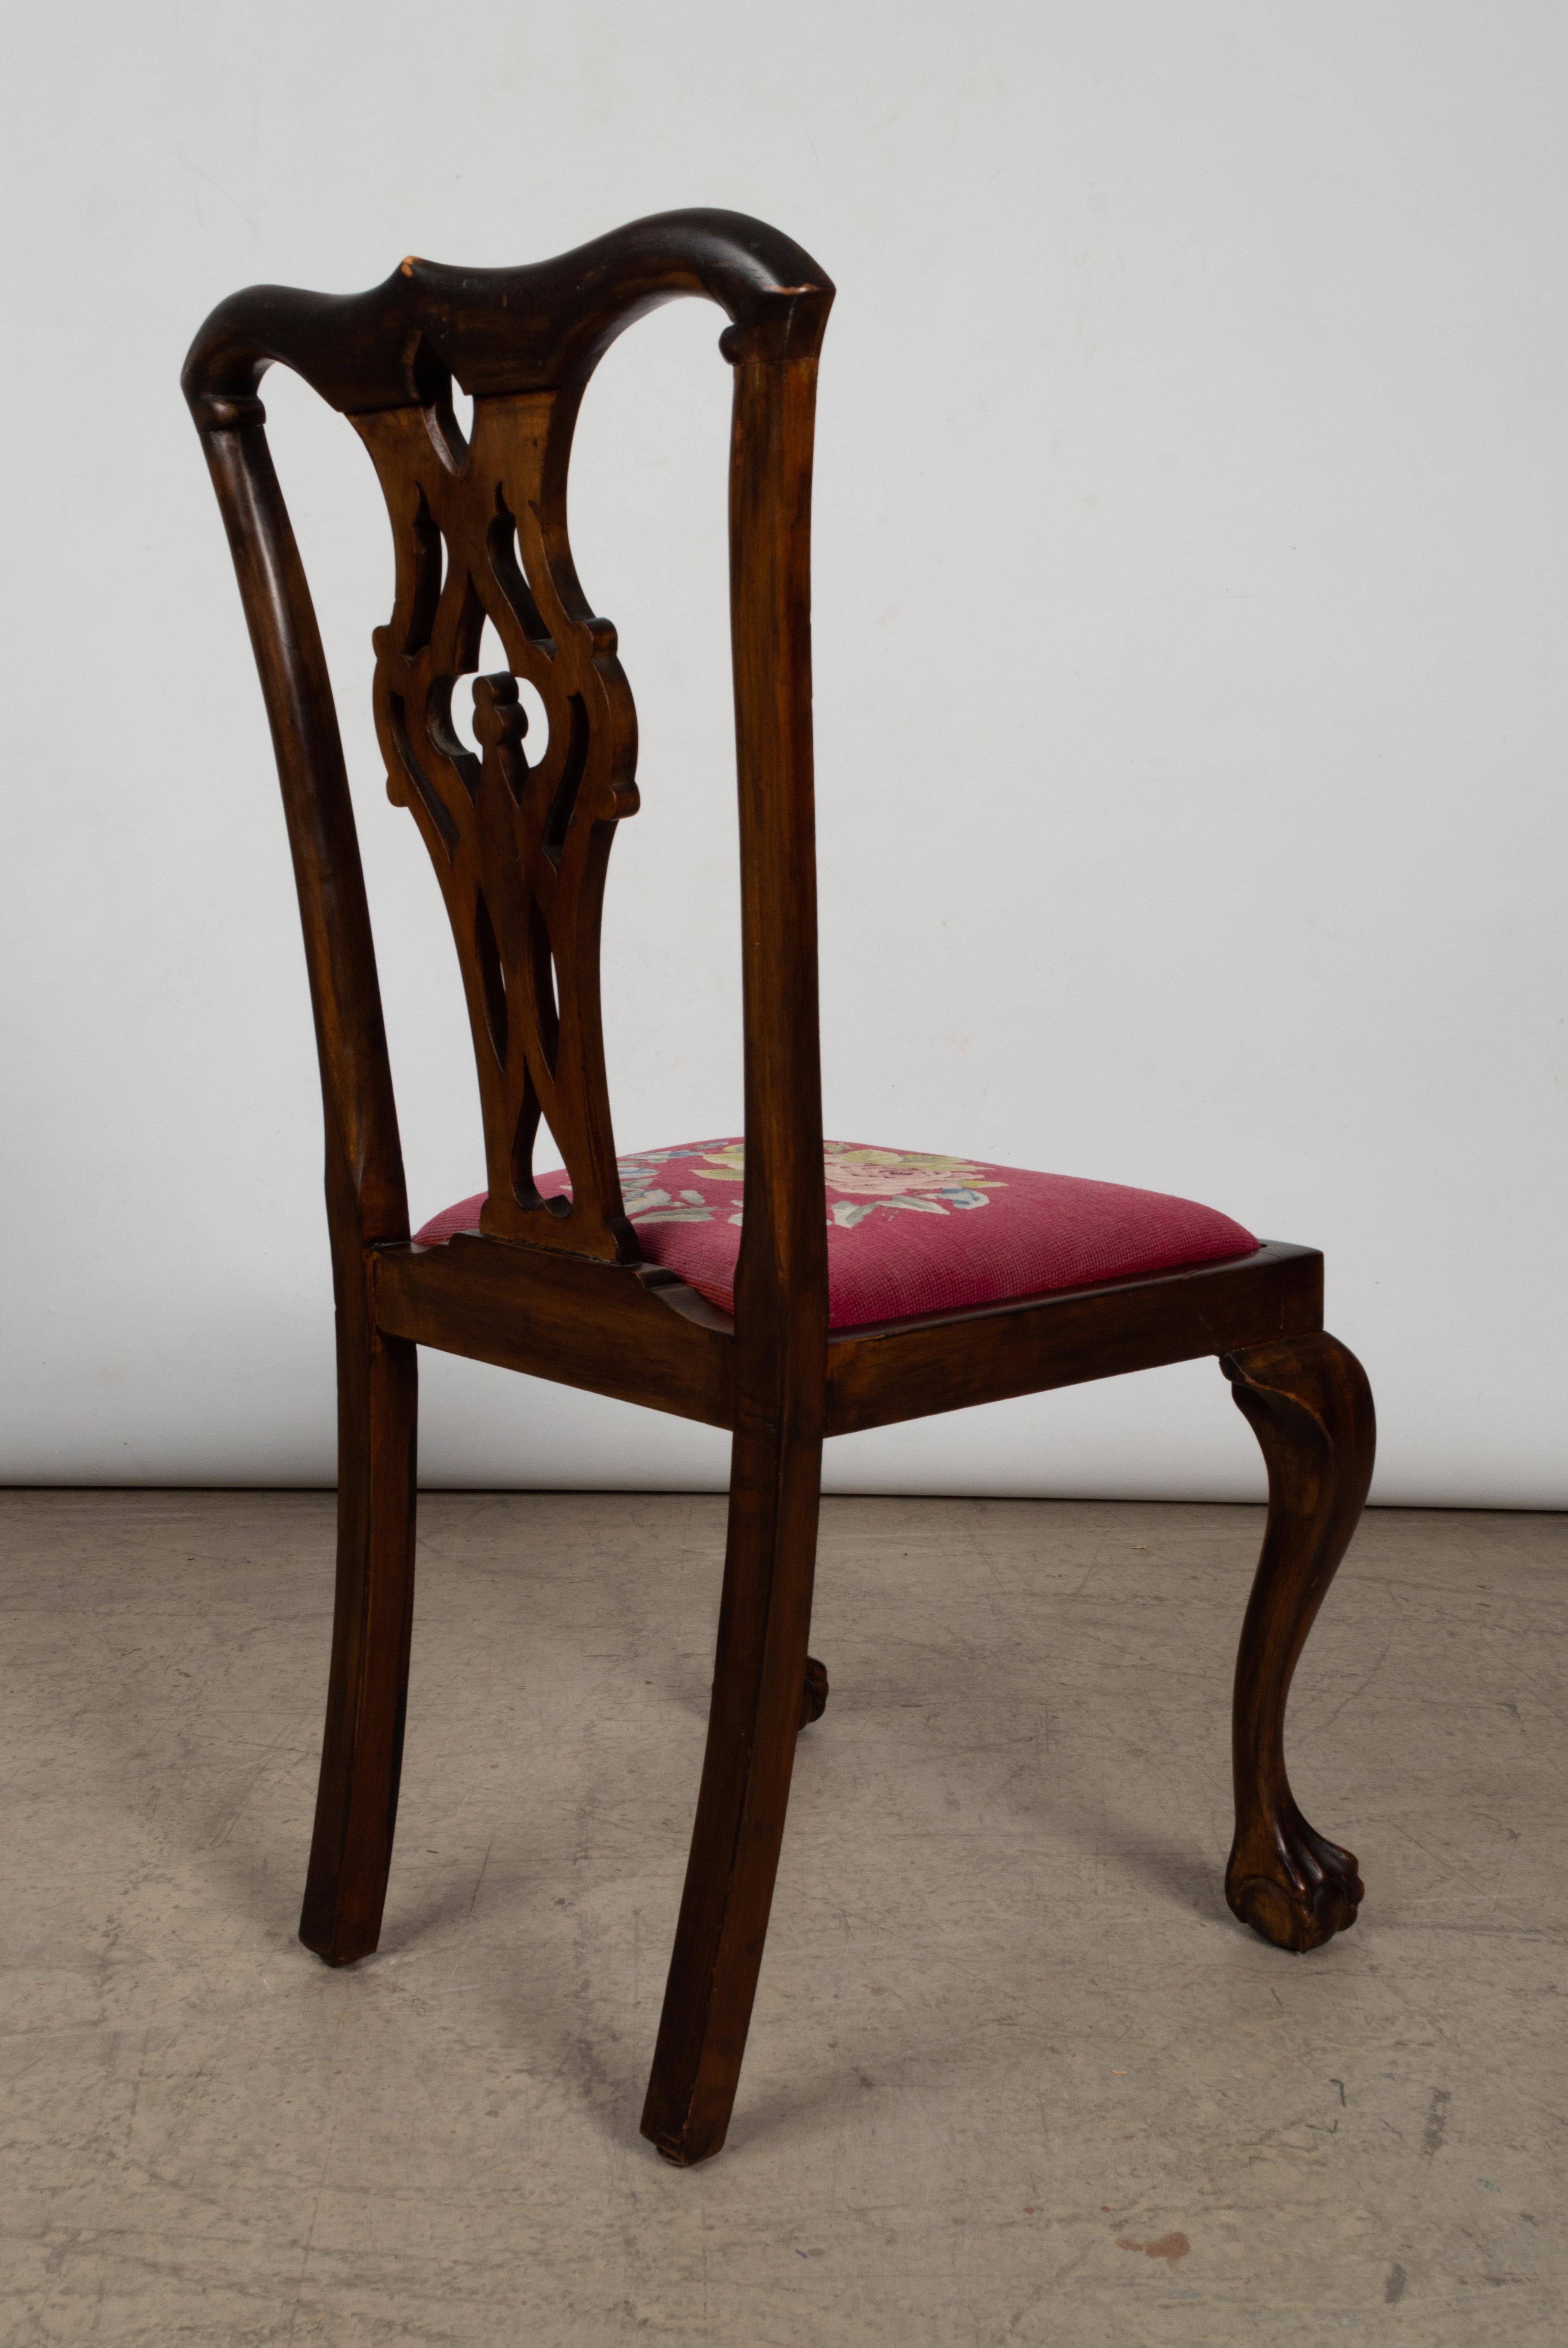 4 Antique English 19th Century Chippendale Revival Mahogany Chairs For Sale 17